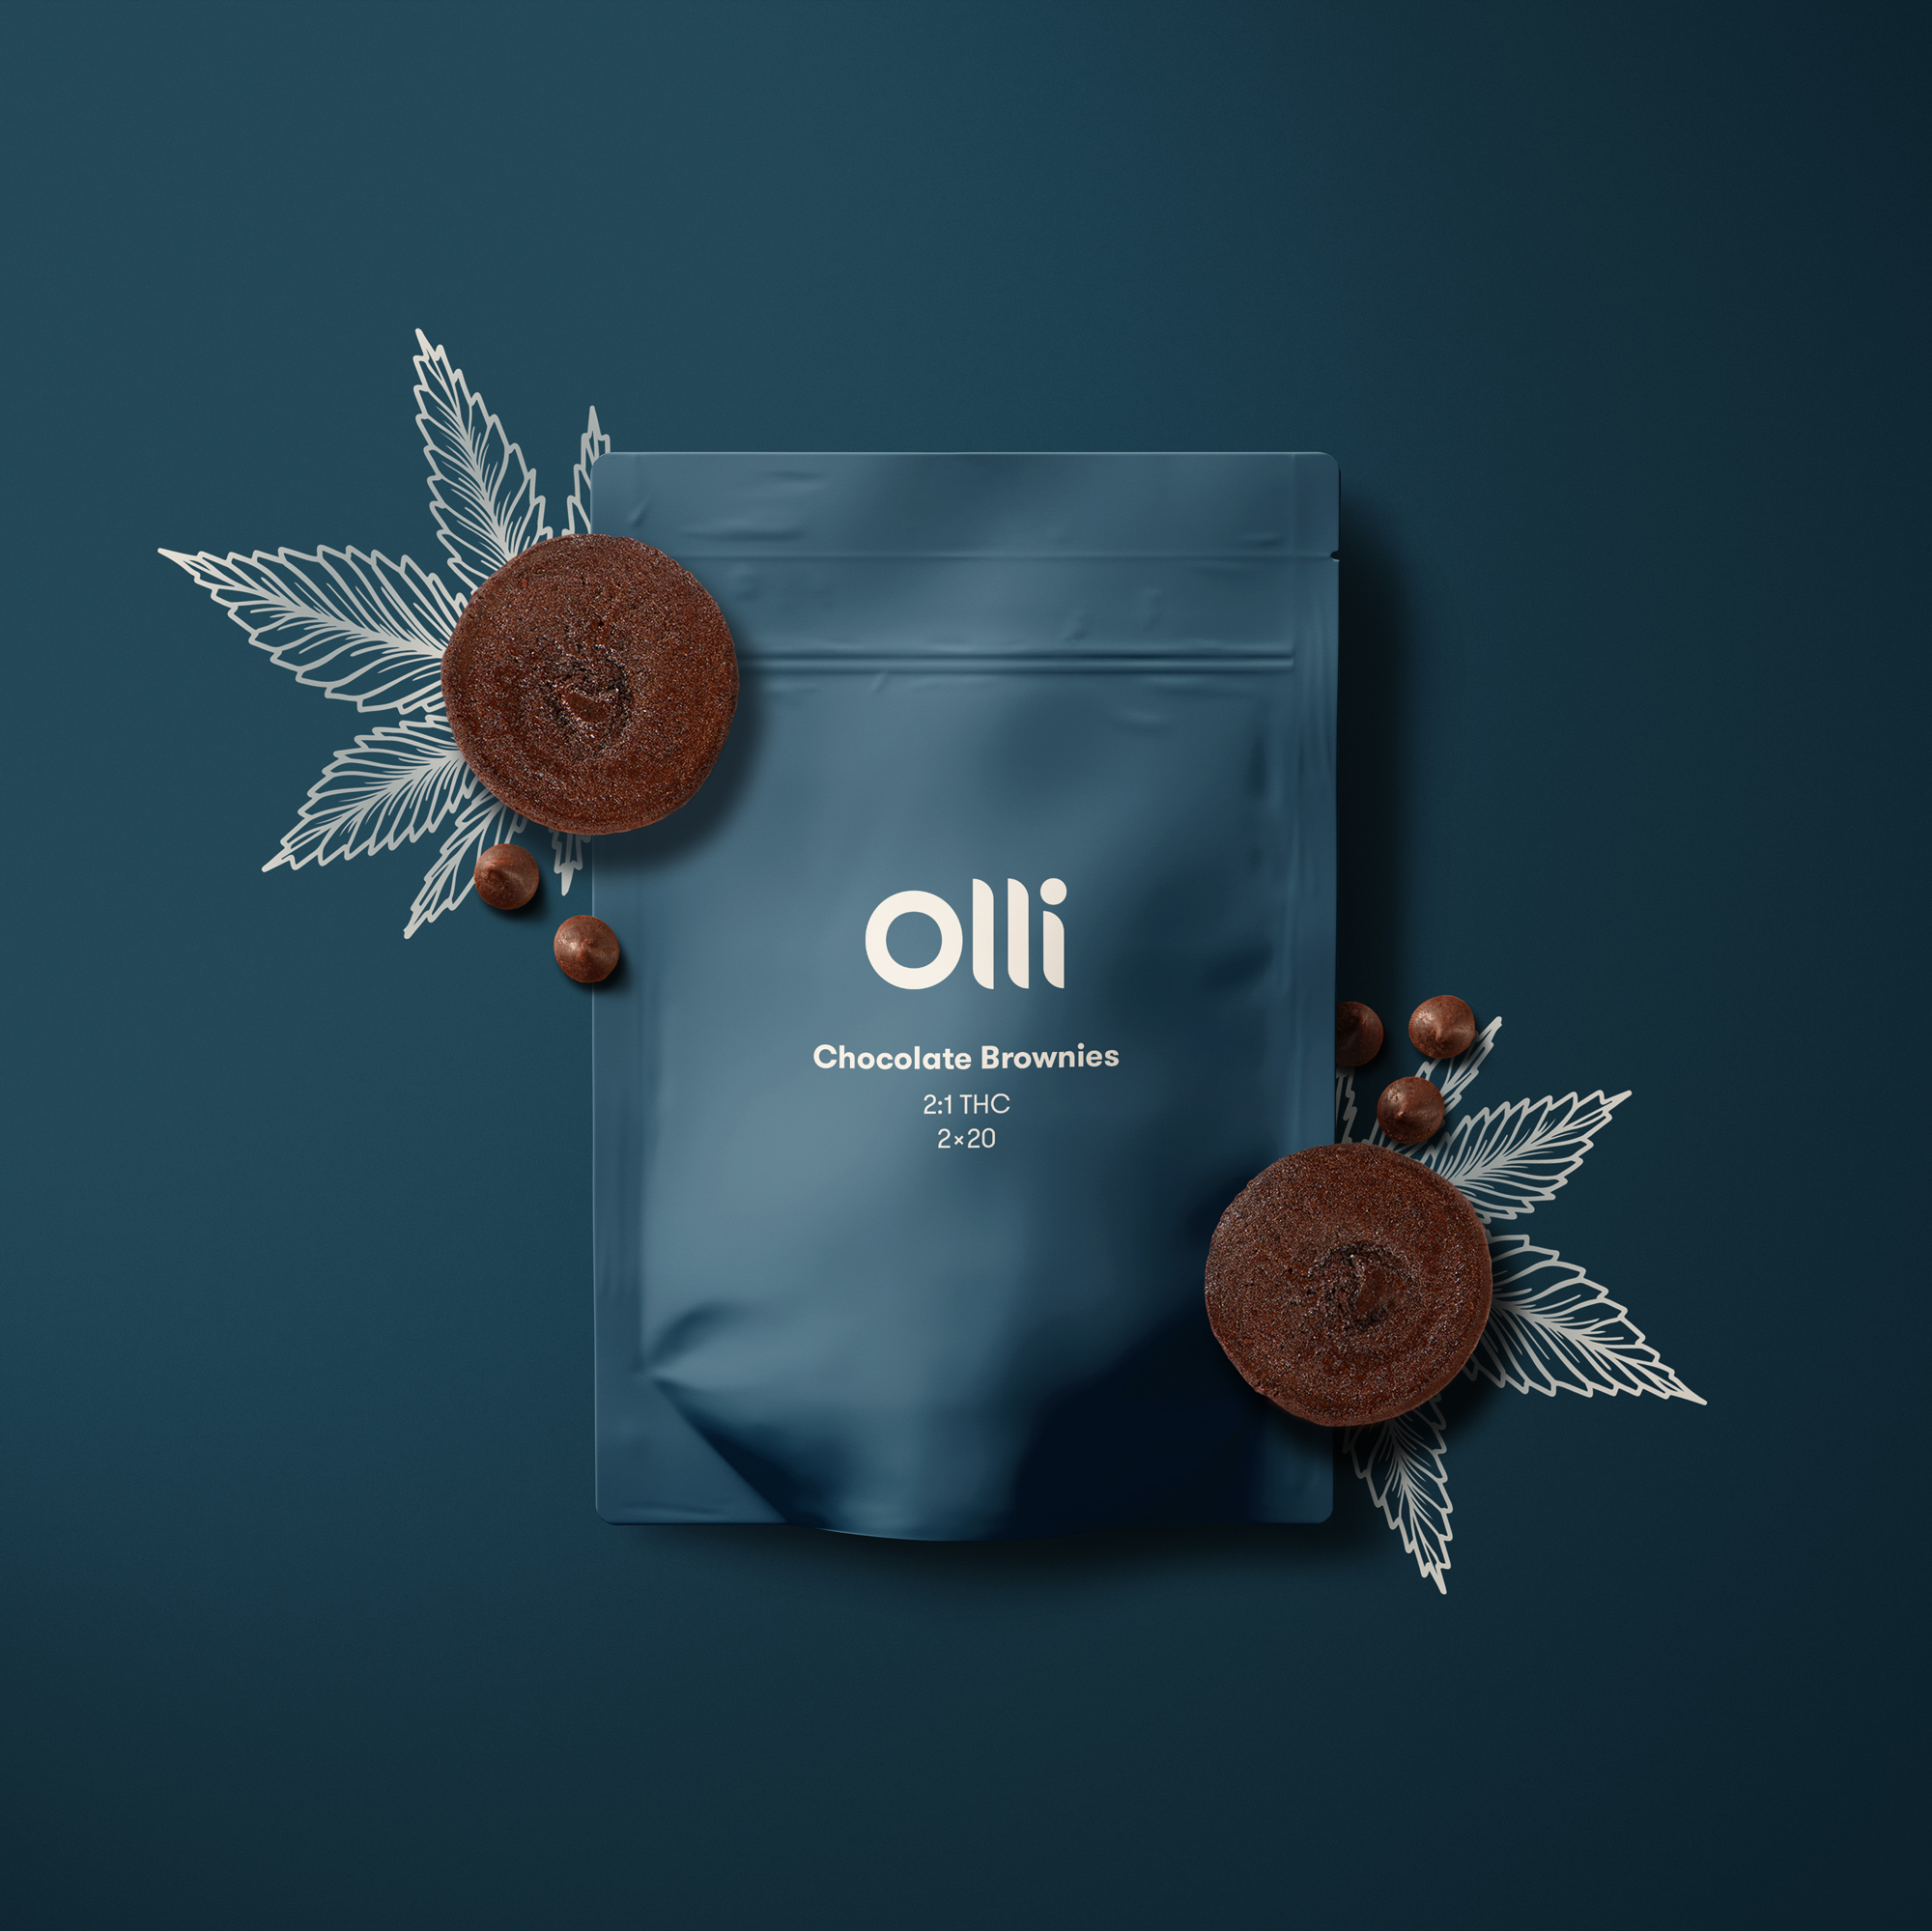 Olli Brands Chocolate brownies crafted, hand-picked and curated by culinary experts